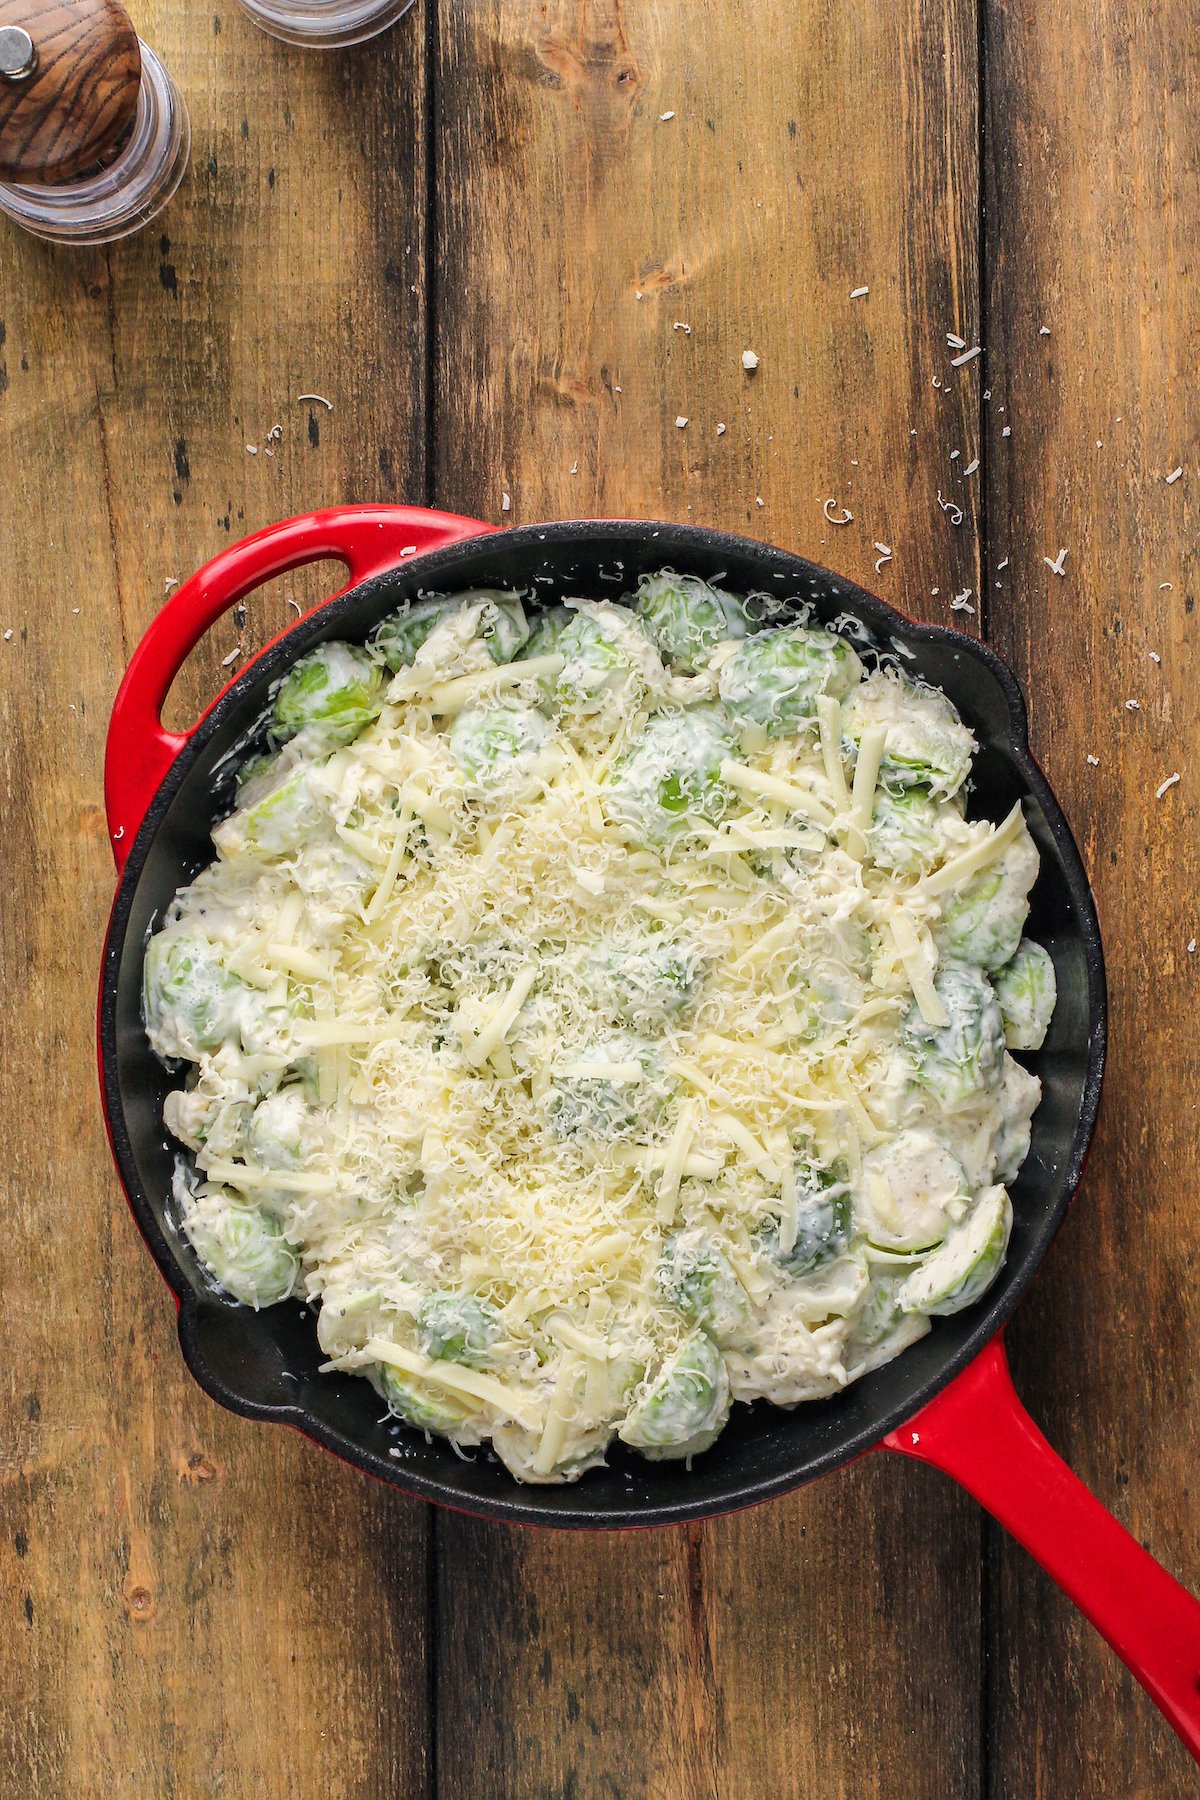 Creamy brussel sprouts in a cast-iron skillet with cheese sprinkled on top.